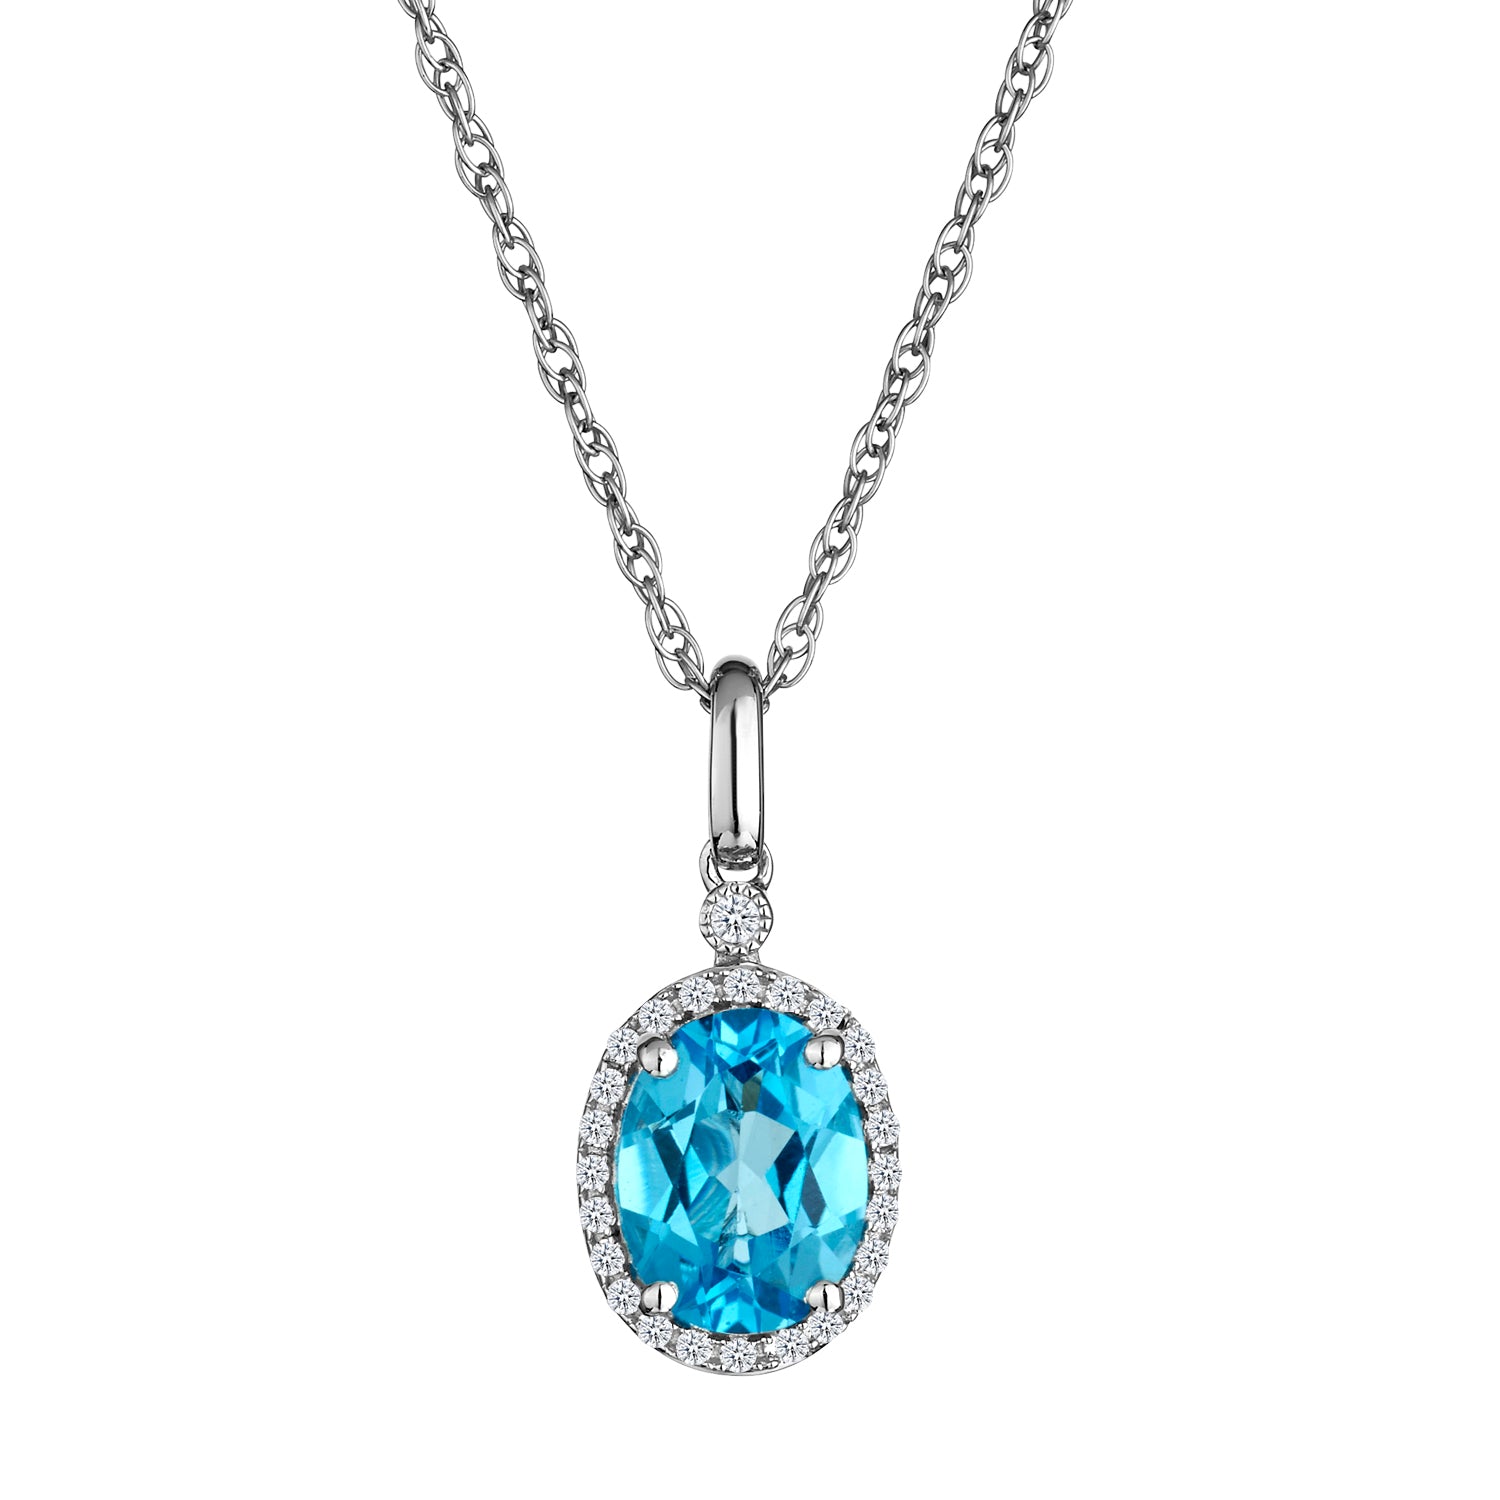 Swiss Blue Topaz & Created White Sapphire Pendant,  Sterling Silver. Necklaces and Pendants. Griffin Jewellery Designs. 